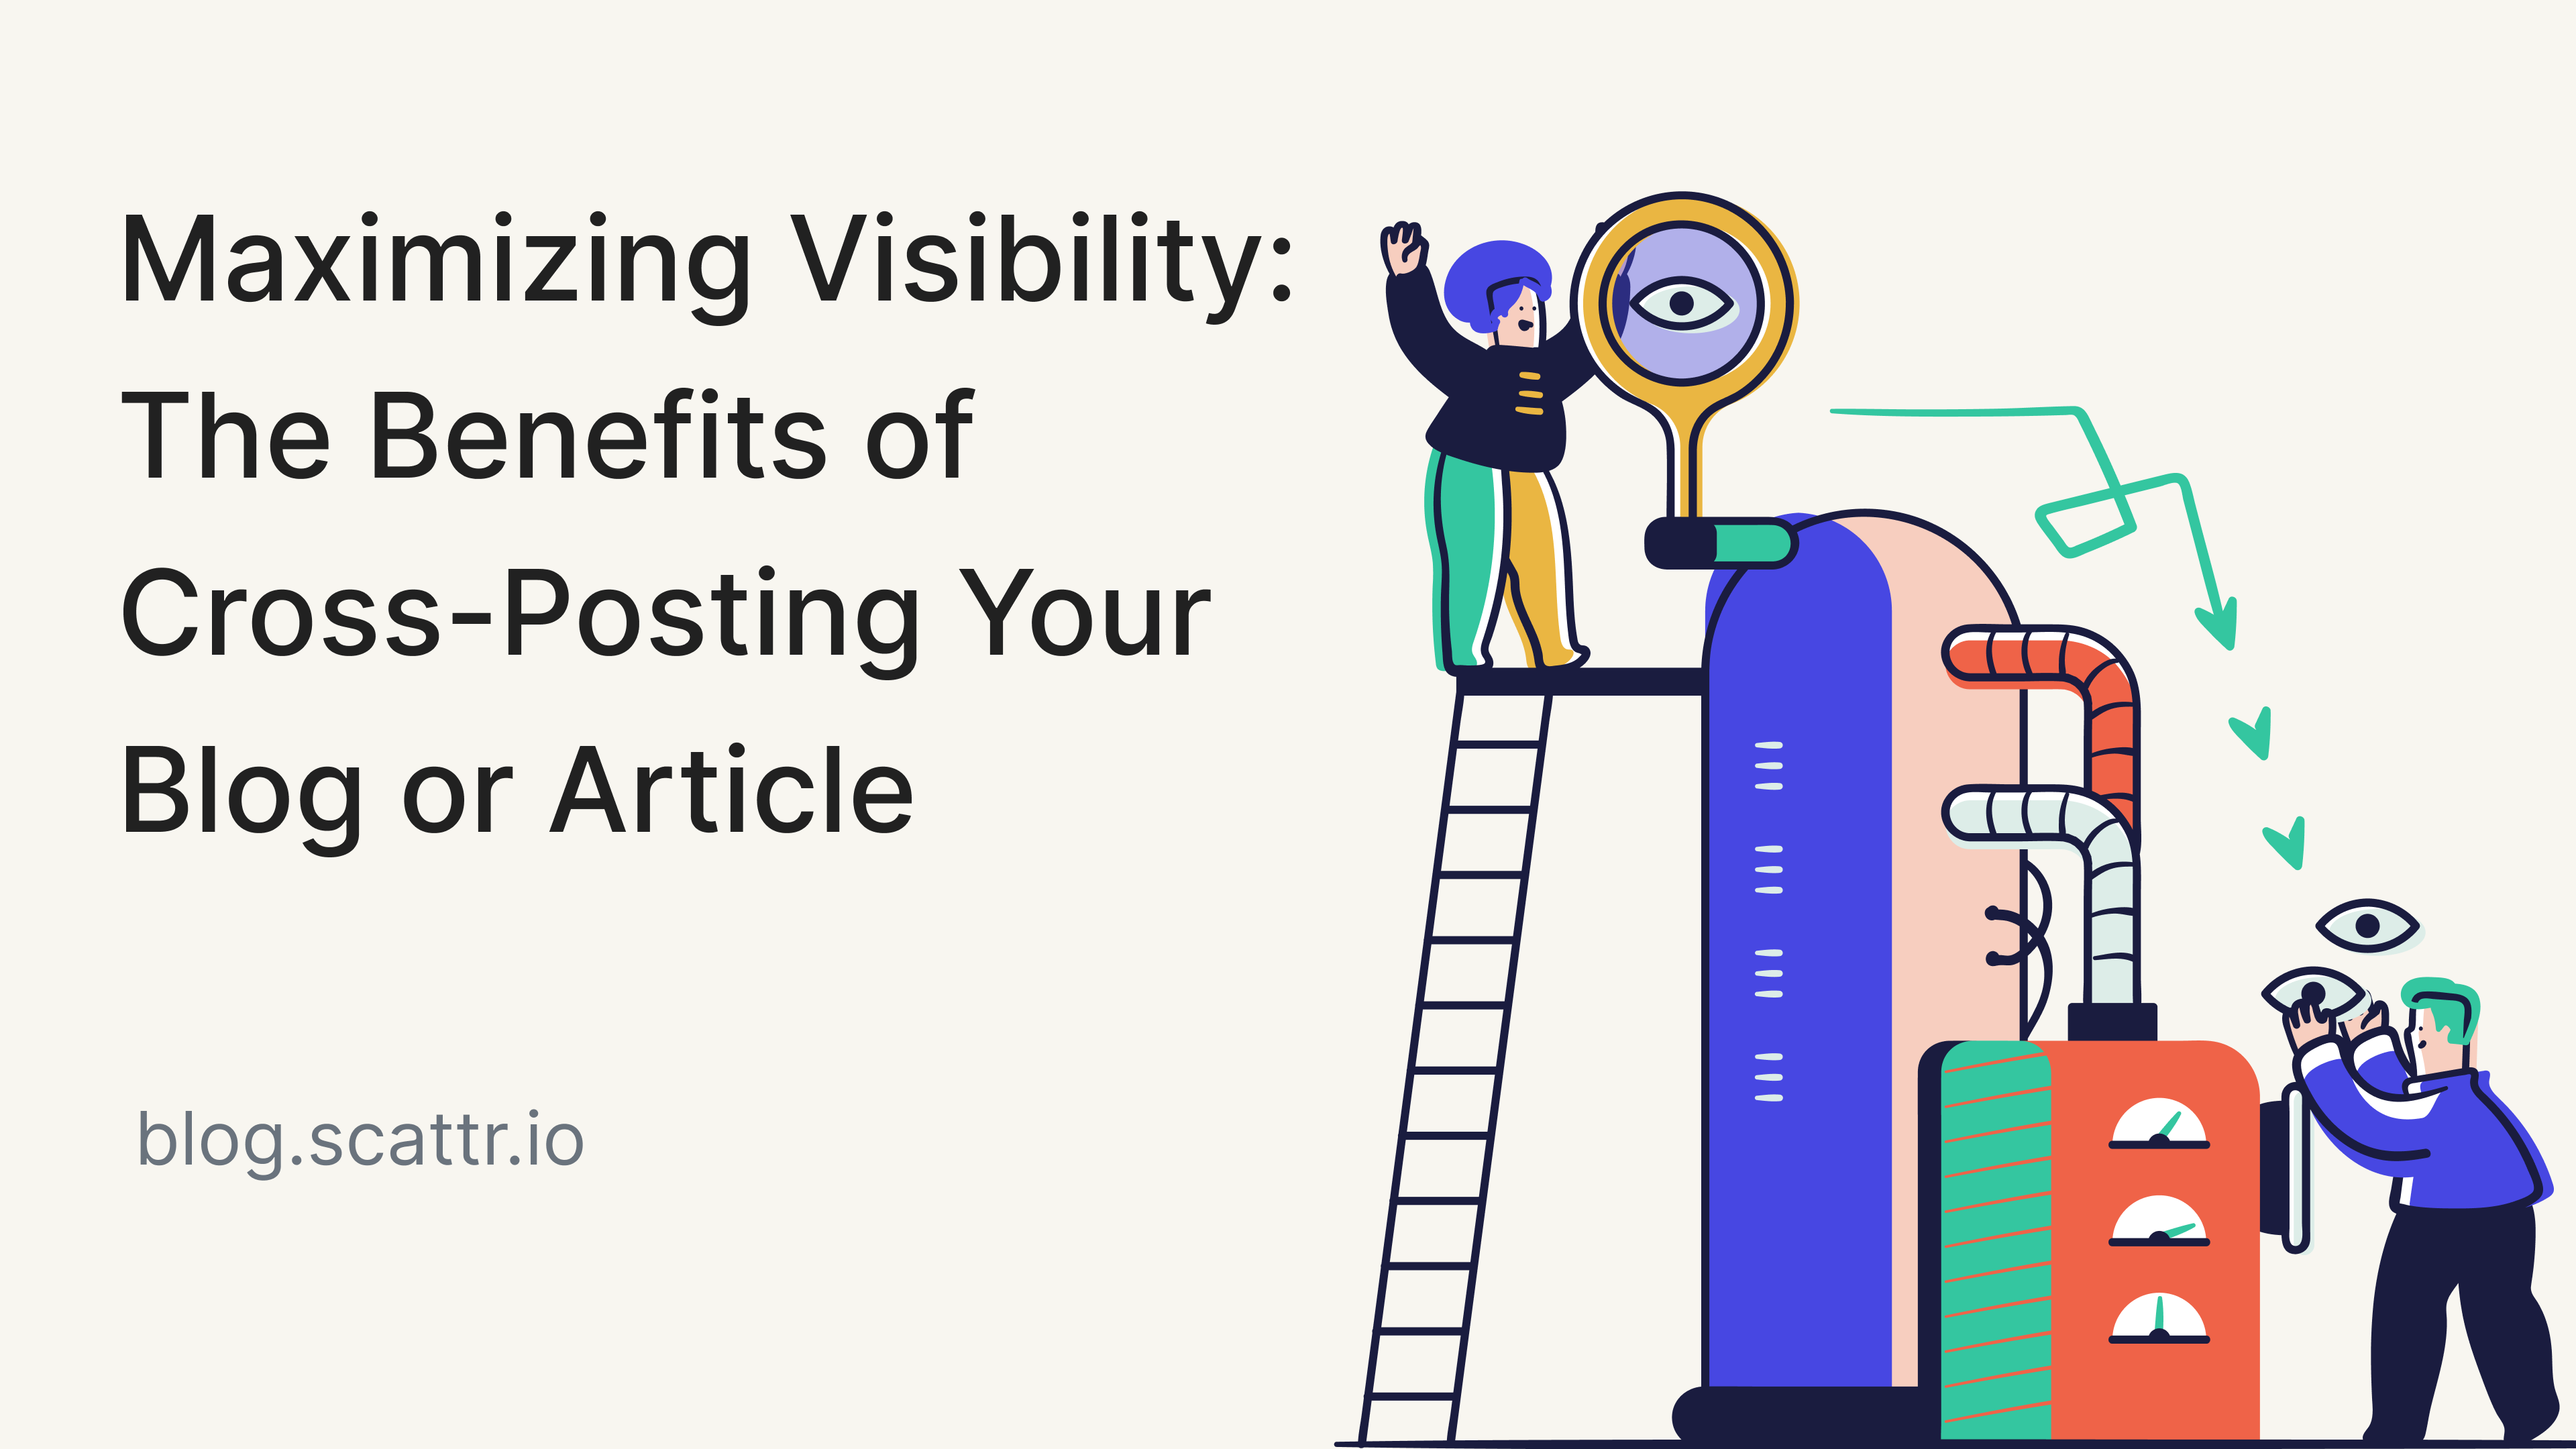 Maximizing Visibility: The Benefits of Cross-Posting Your Blog or Article